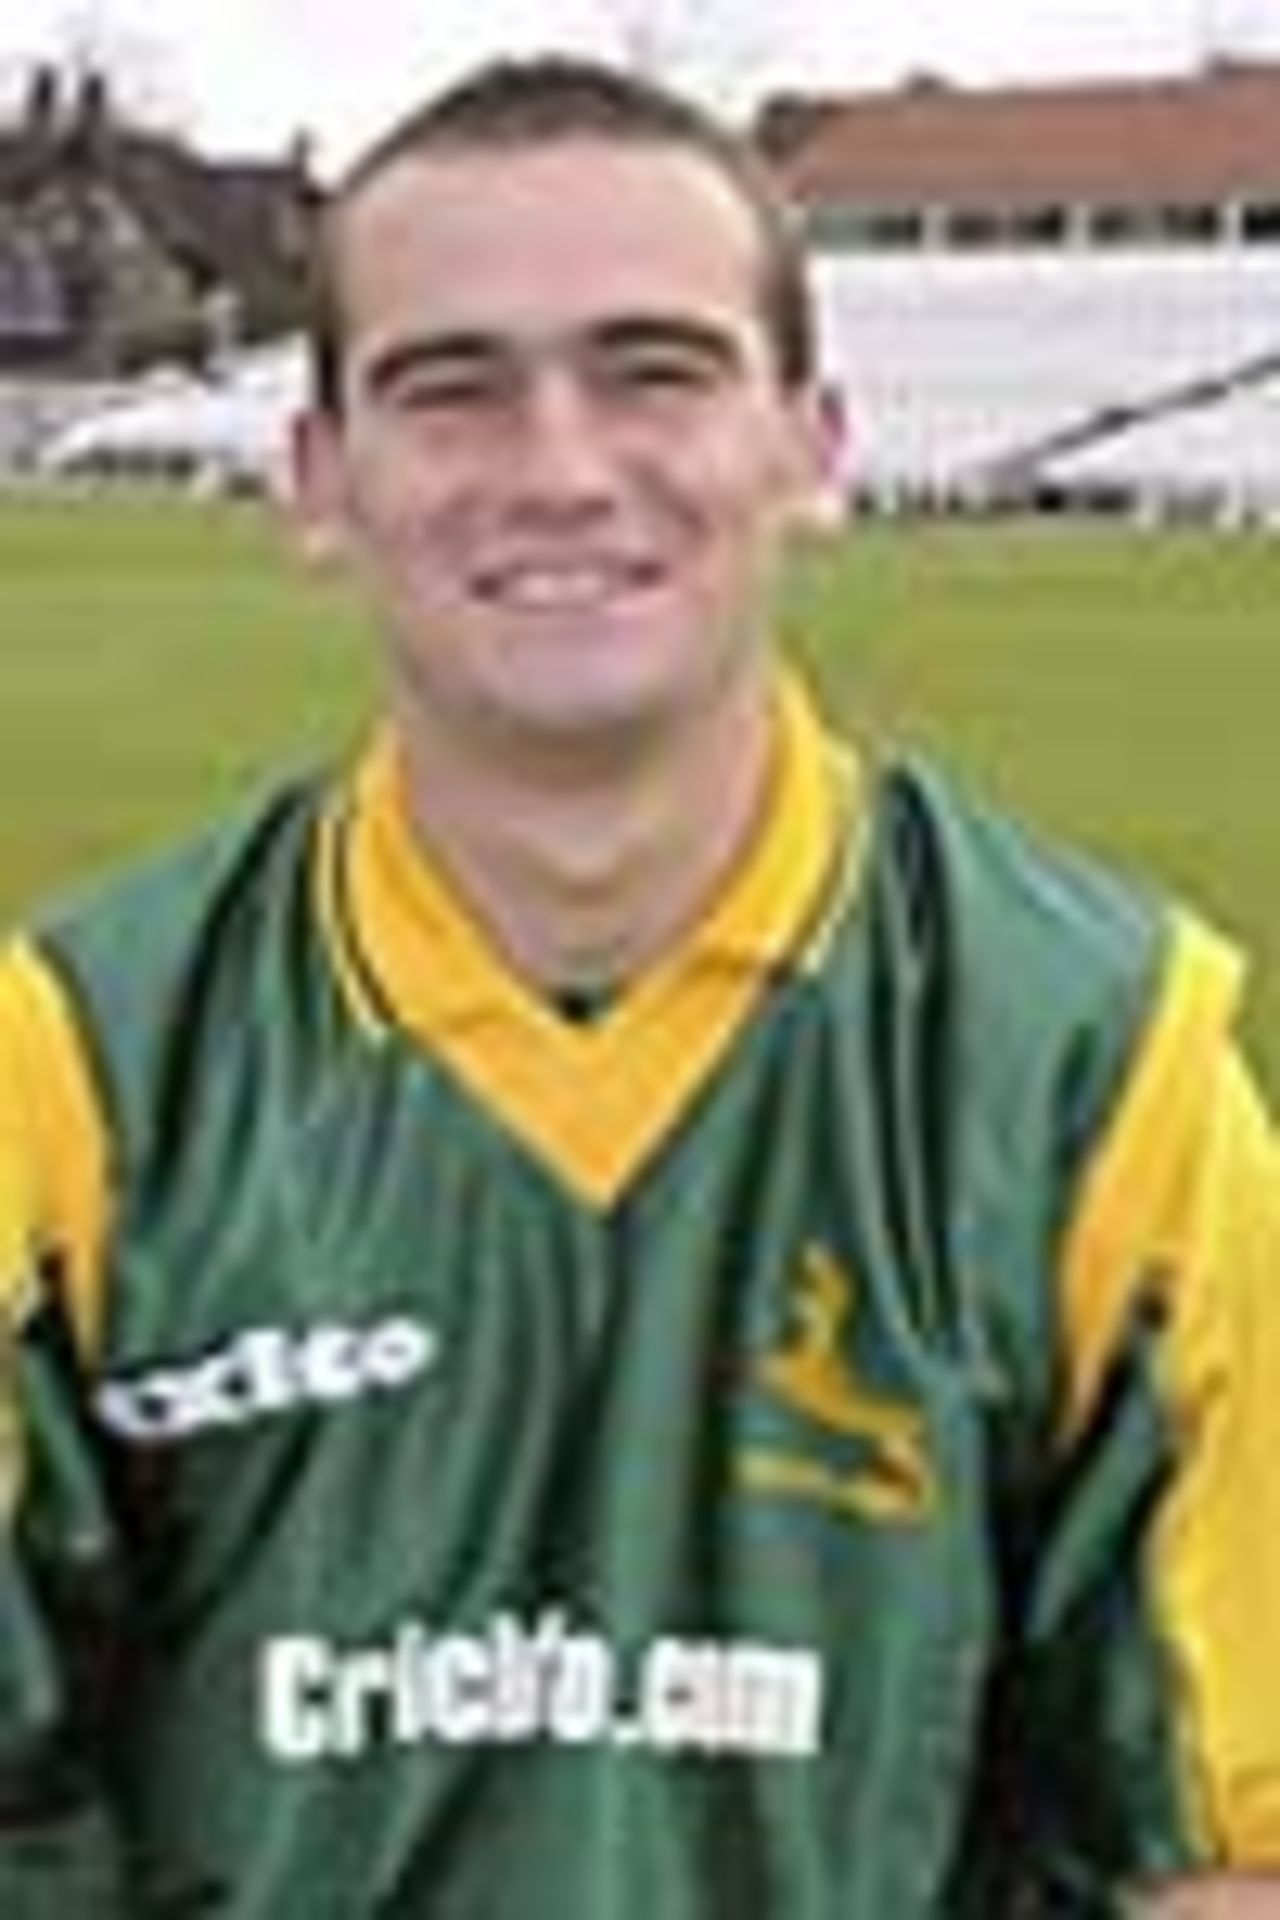 Taken at the Notts CCC photocall April 2001